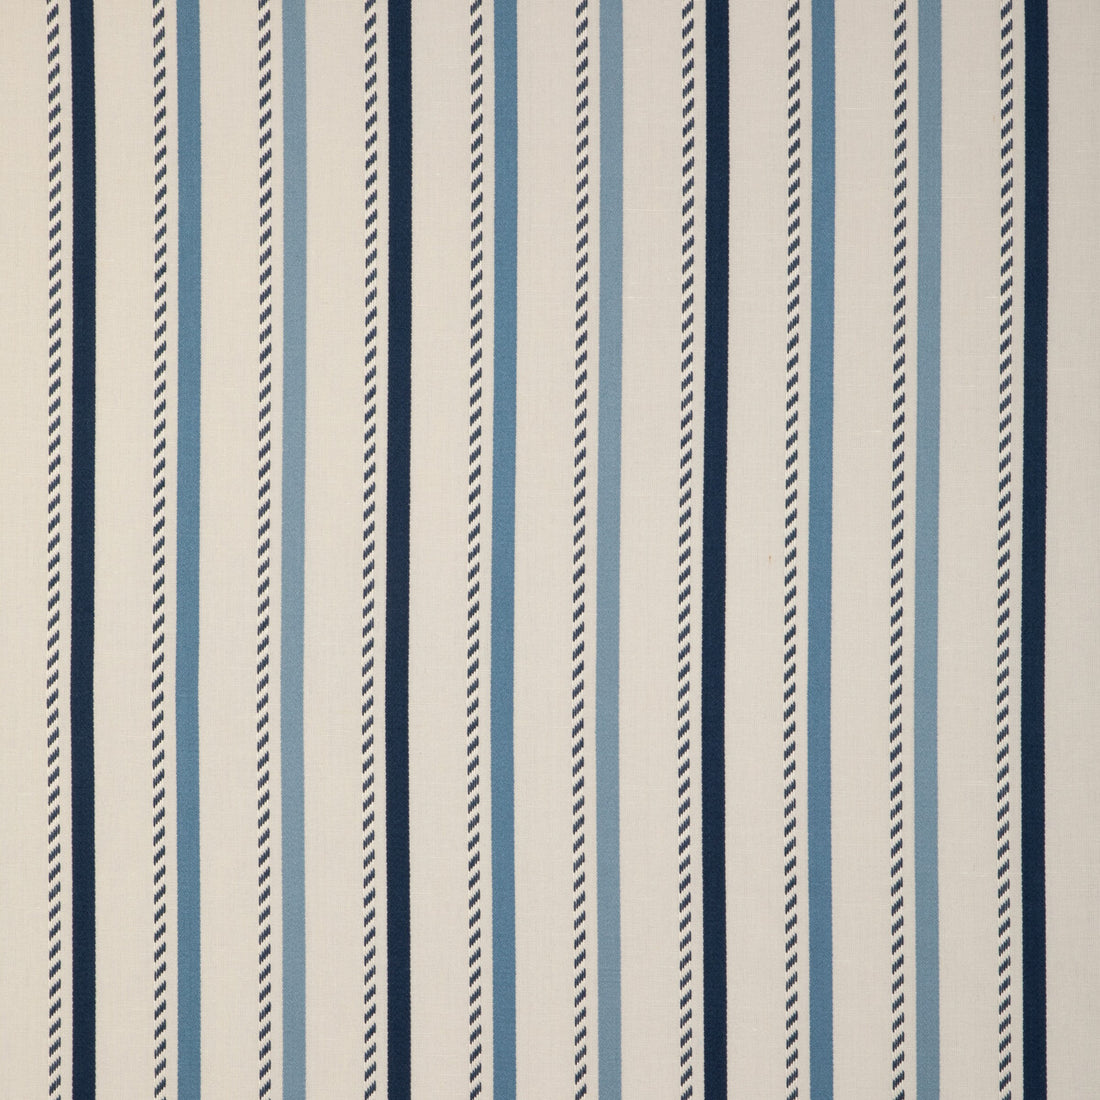 Buxton Stripe fabric in navy/sky color - pattern 2023106.550.0 - by Lee Jofa in the Highfield Stripes And Plaids collection